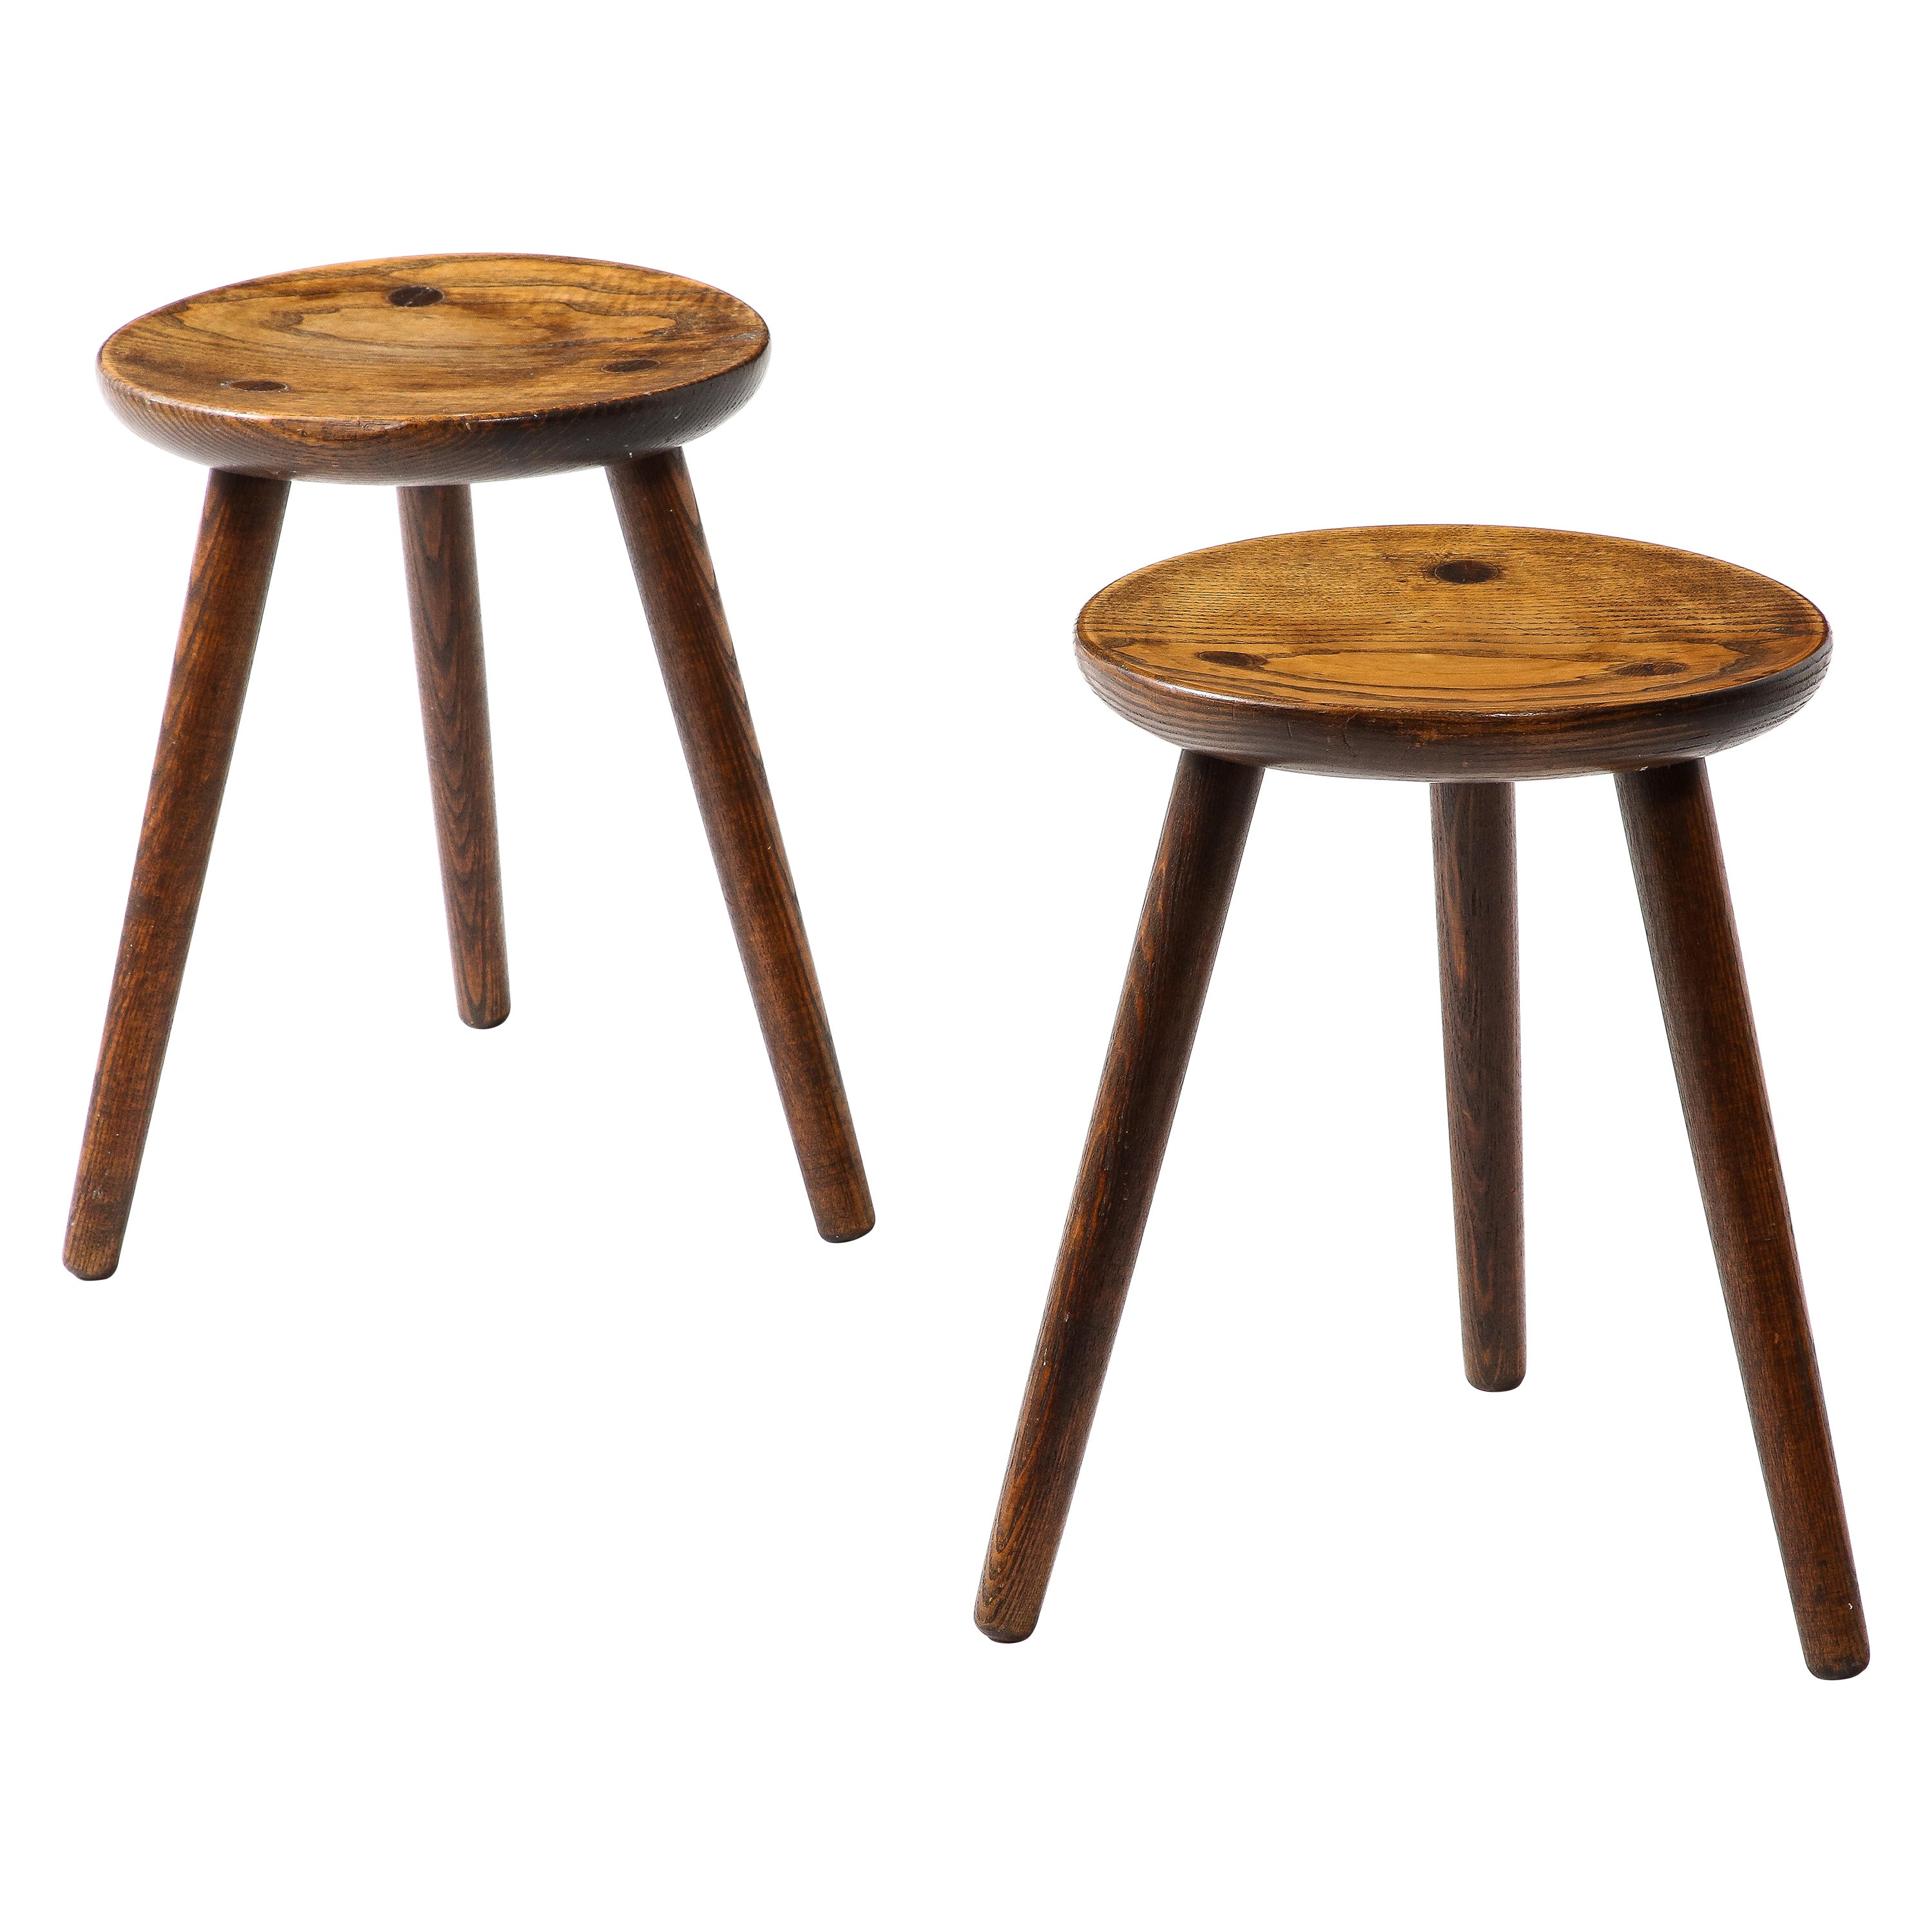 Pair of Tripod Stools in the Manner of Perriand, France 1950s For Sale